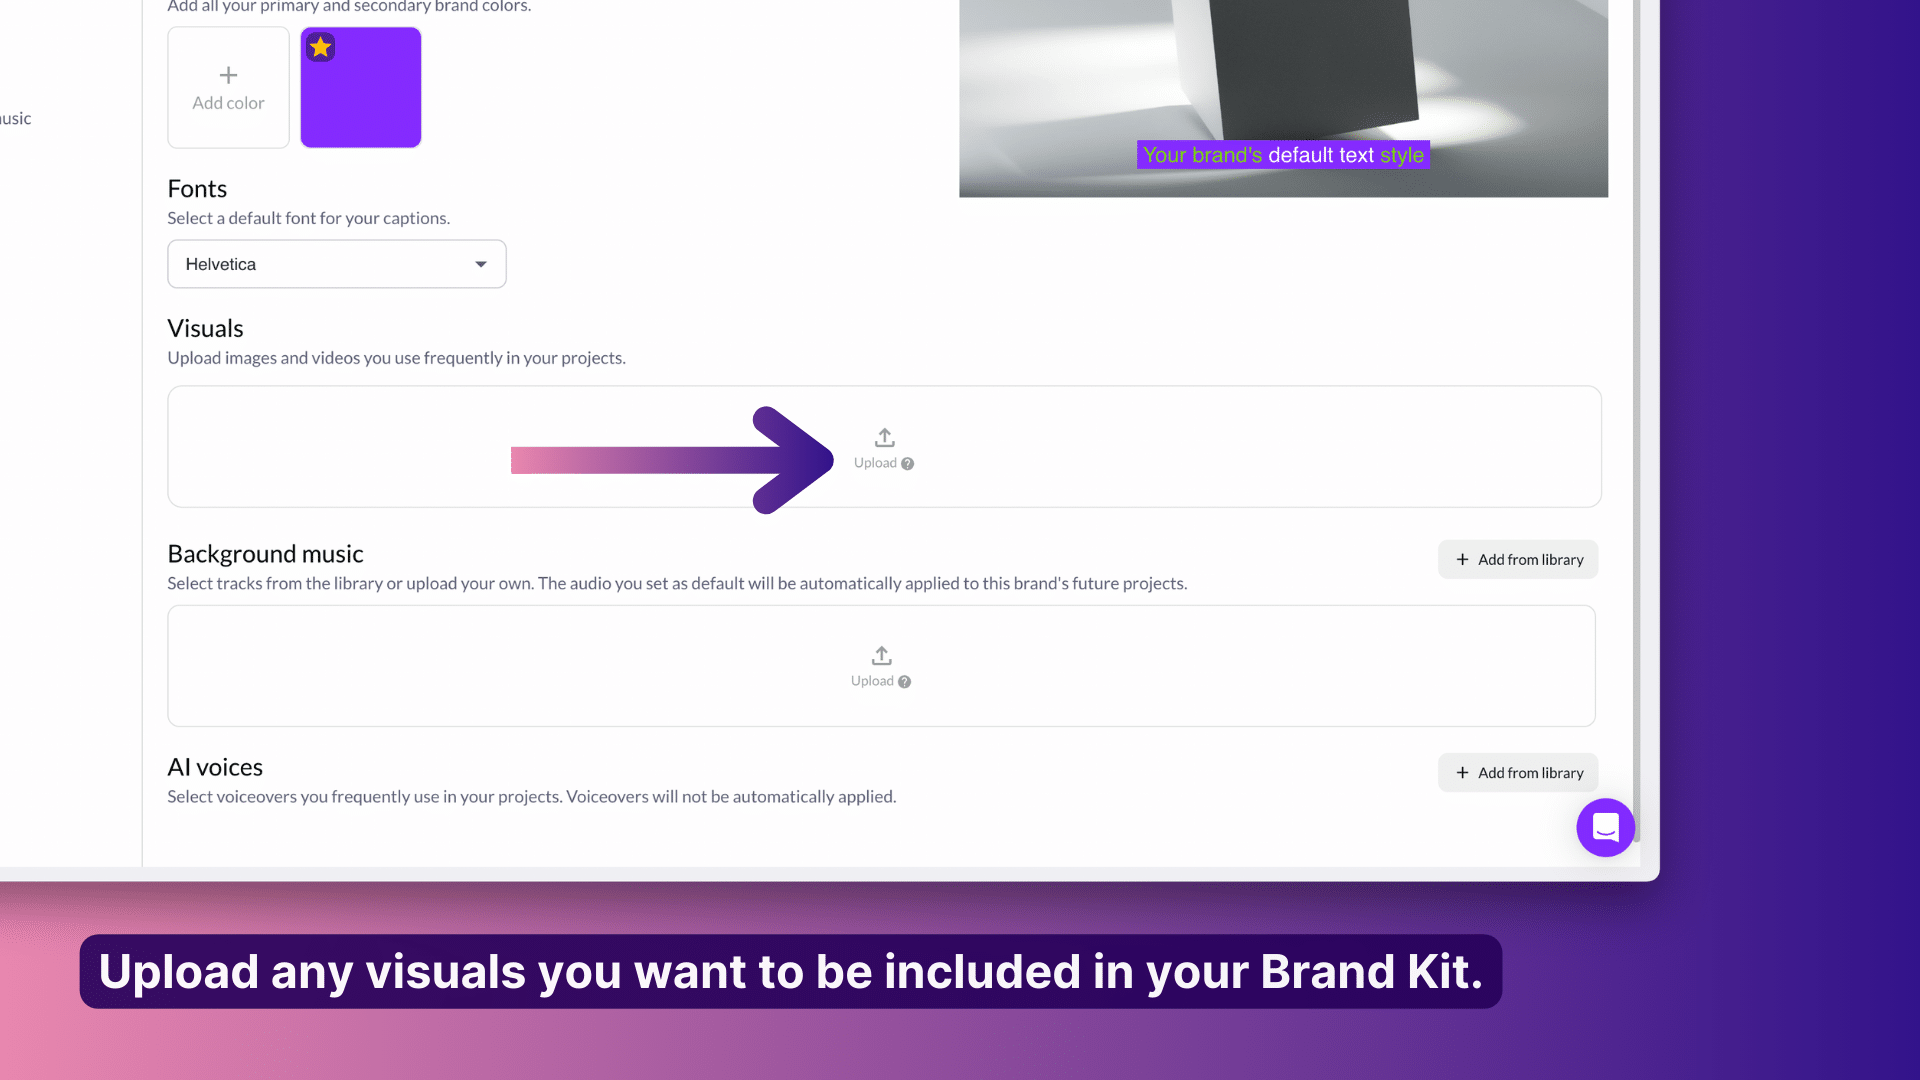 Upload any visuals you want to be included in your brand kit